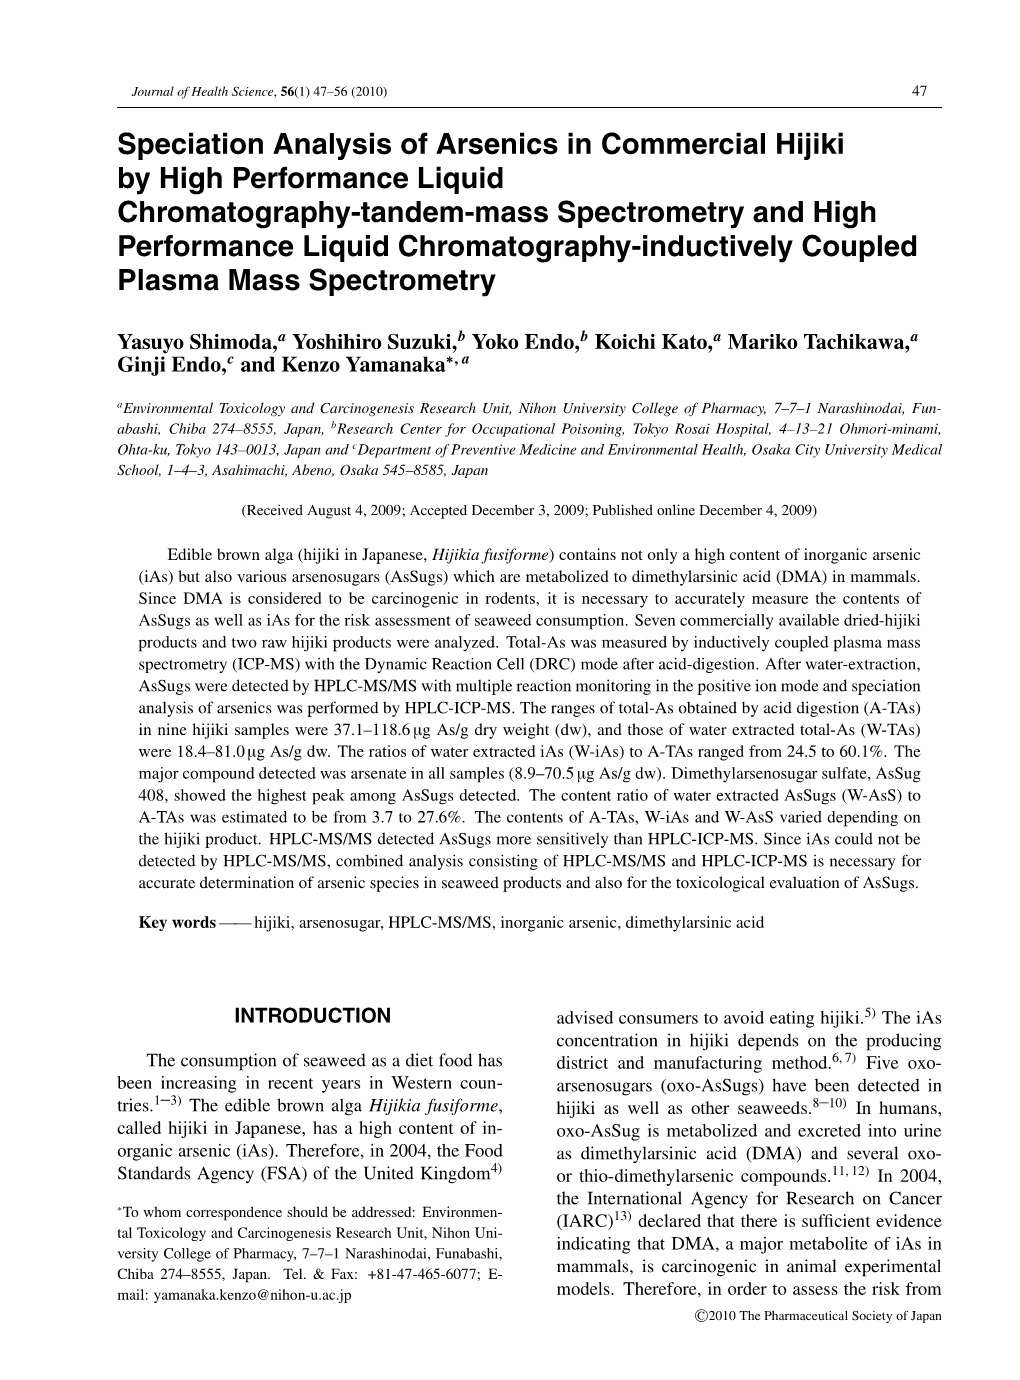 Speciation Analysis of Arsenics in Commercial Hijiki by High Performance Liquid Chromatography-Tandem-Mass Spectrometry and High